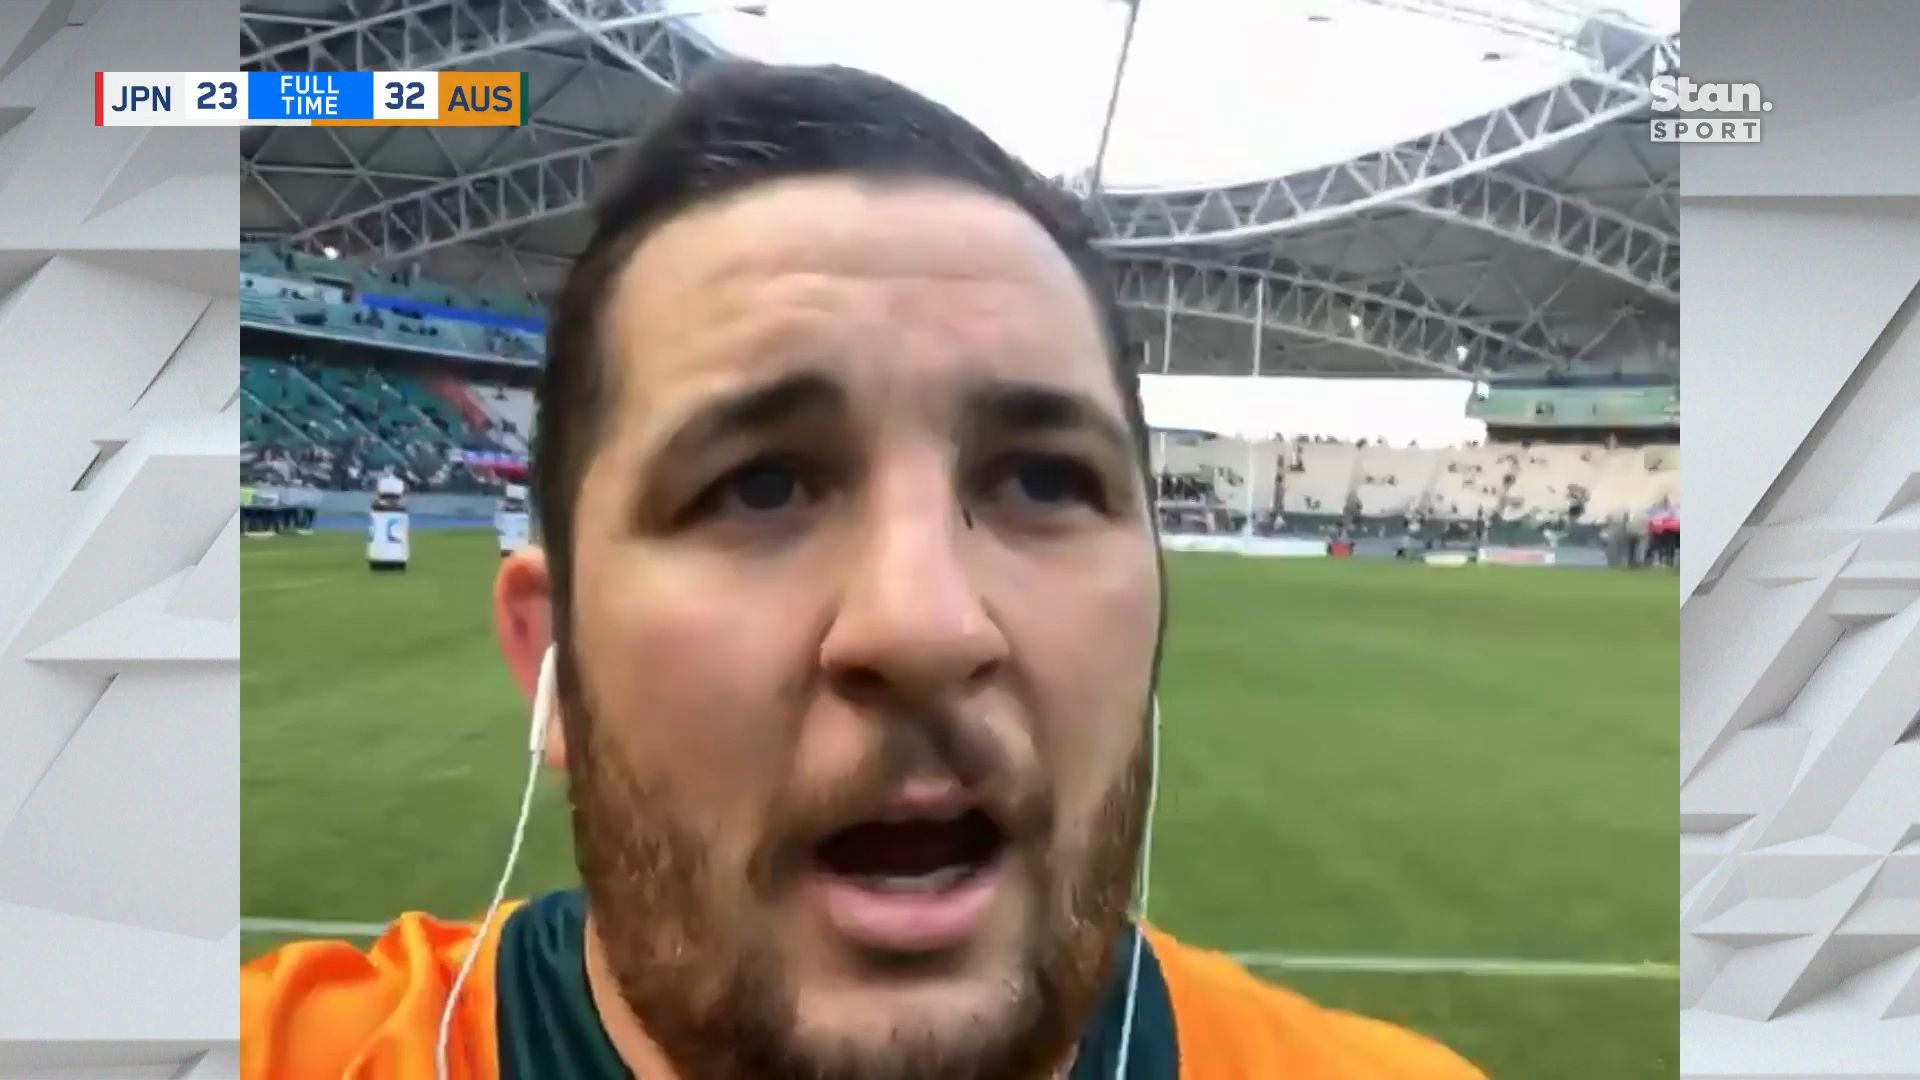 Wallabies hooker Connal McInerney gives lovely interview after scoring crucial try on Test debut